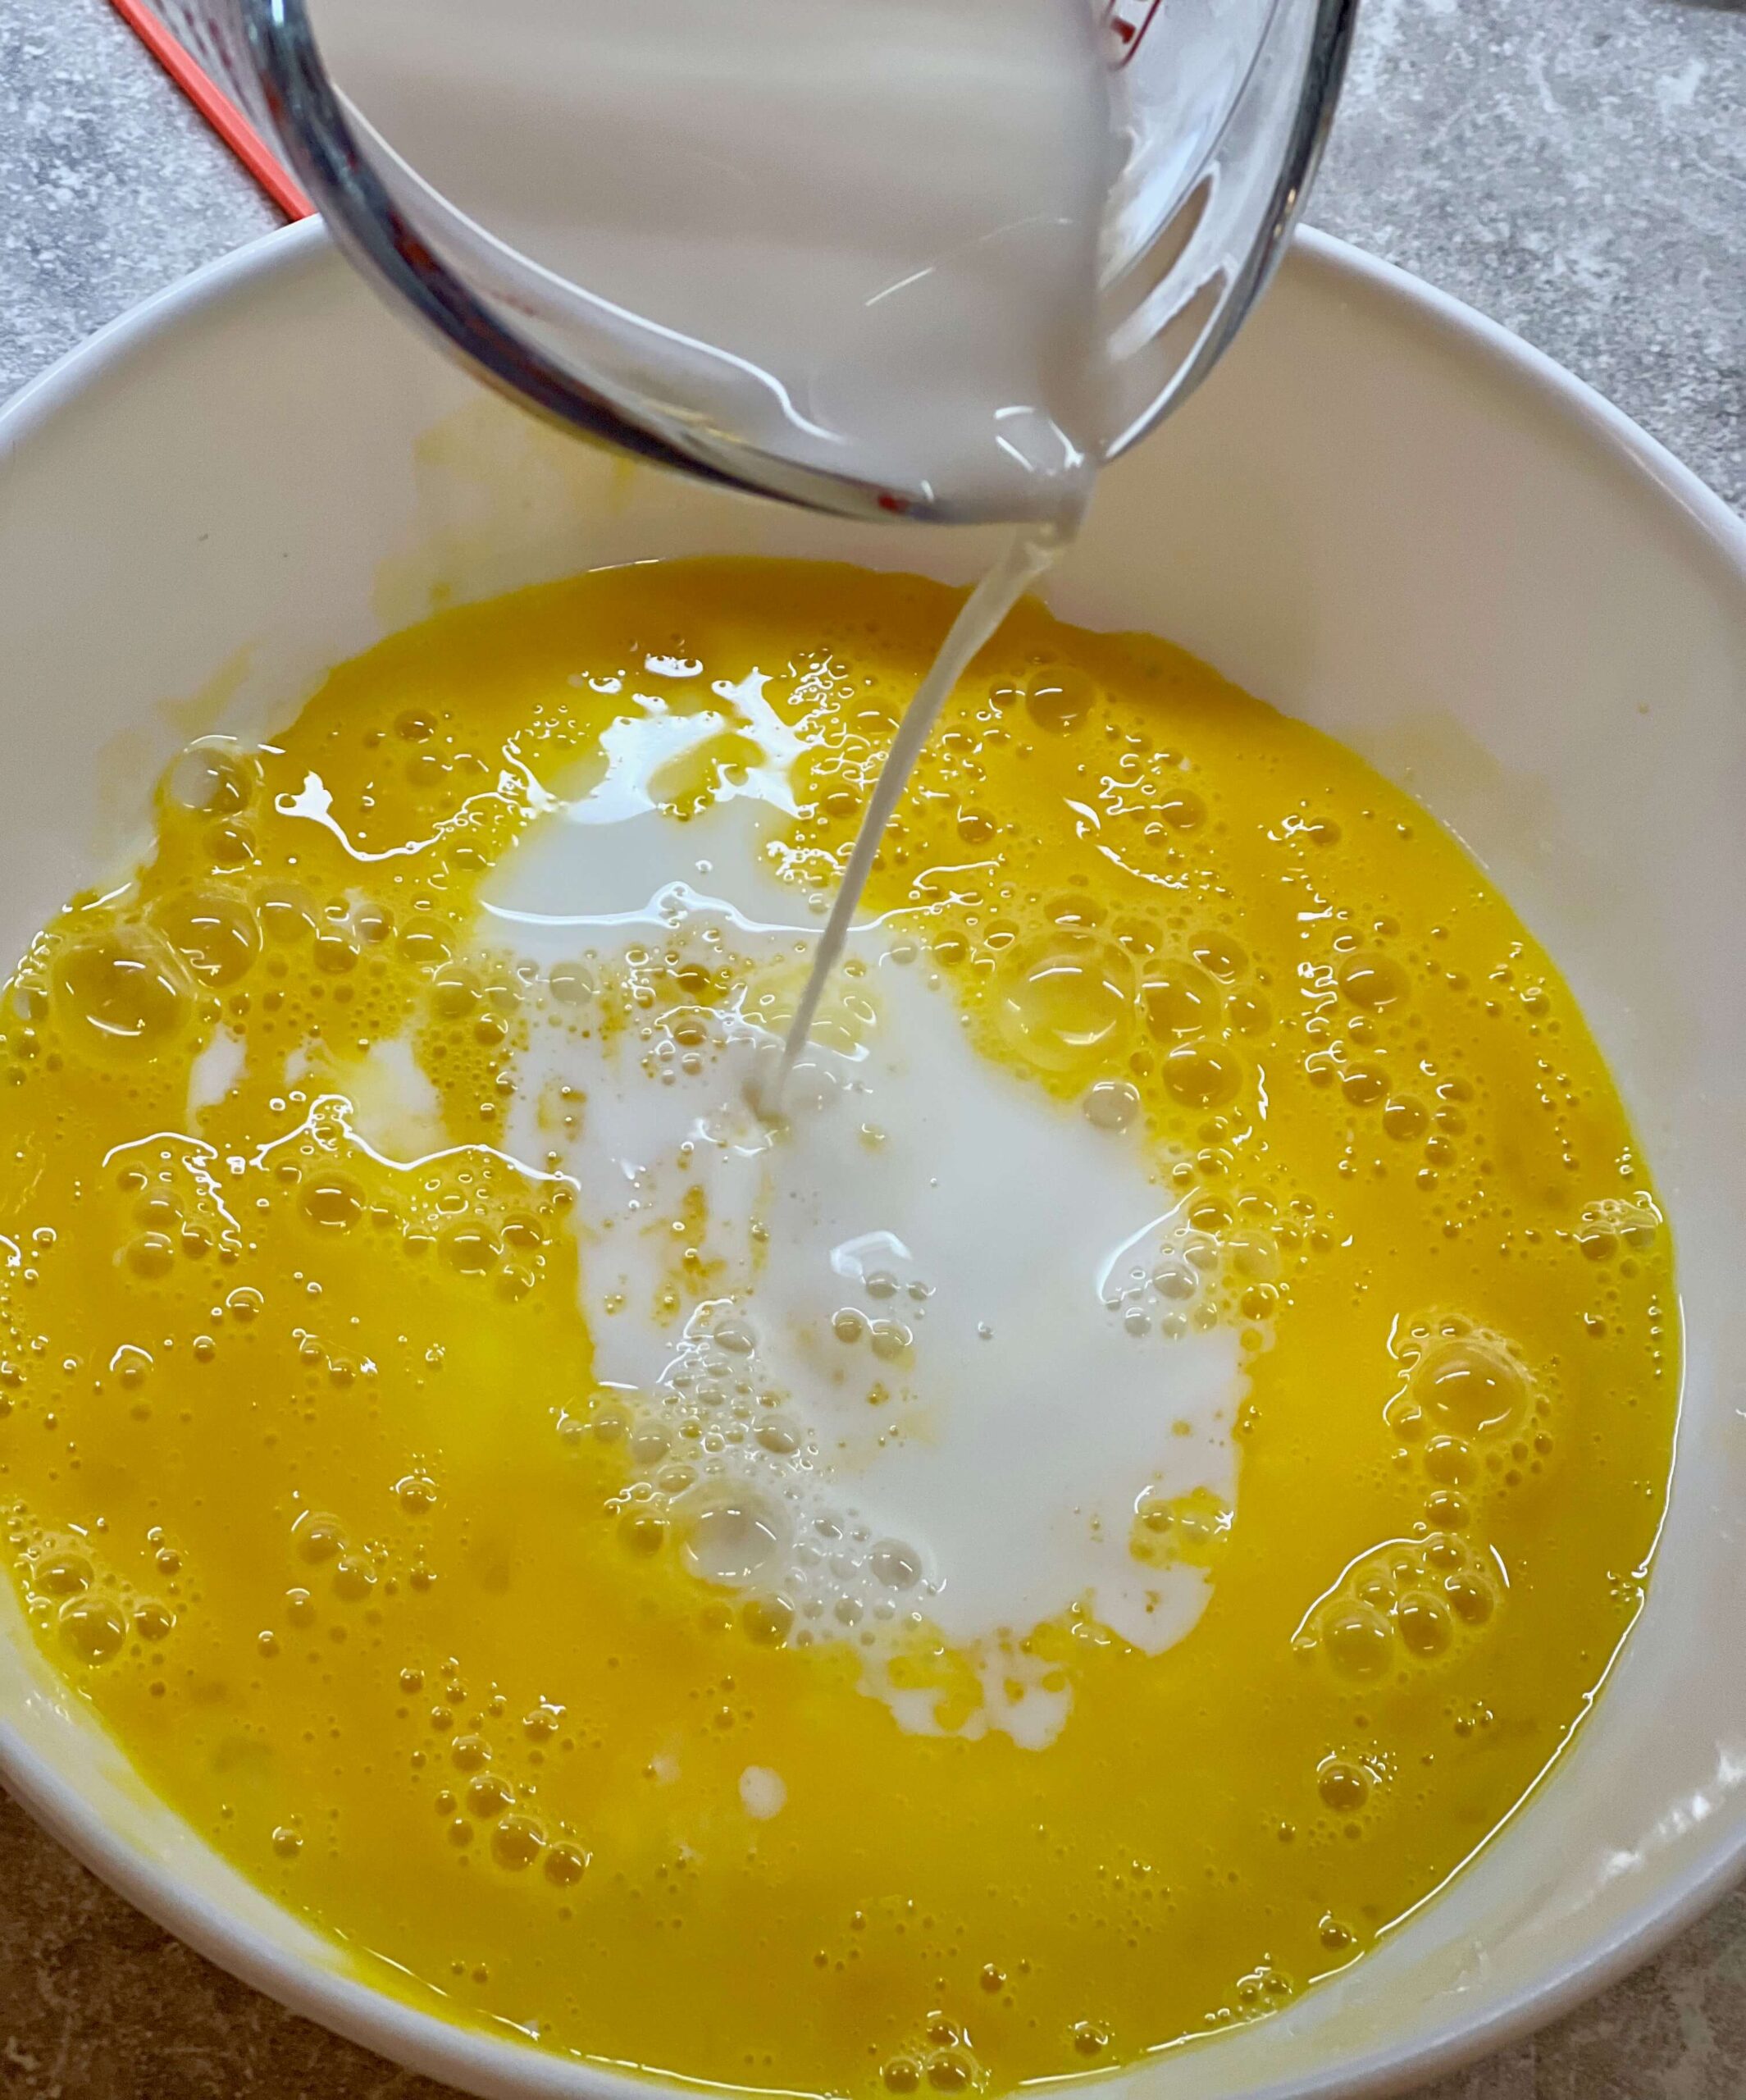 Add milk to the whisked eggs.